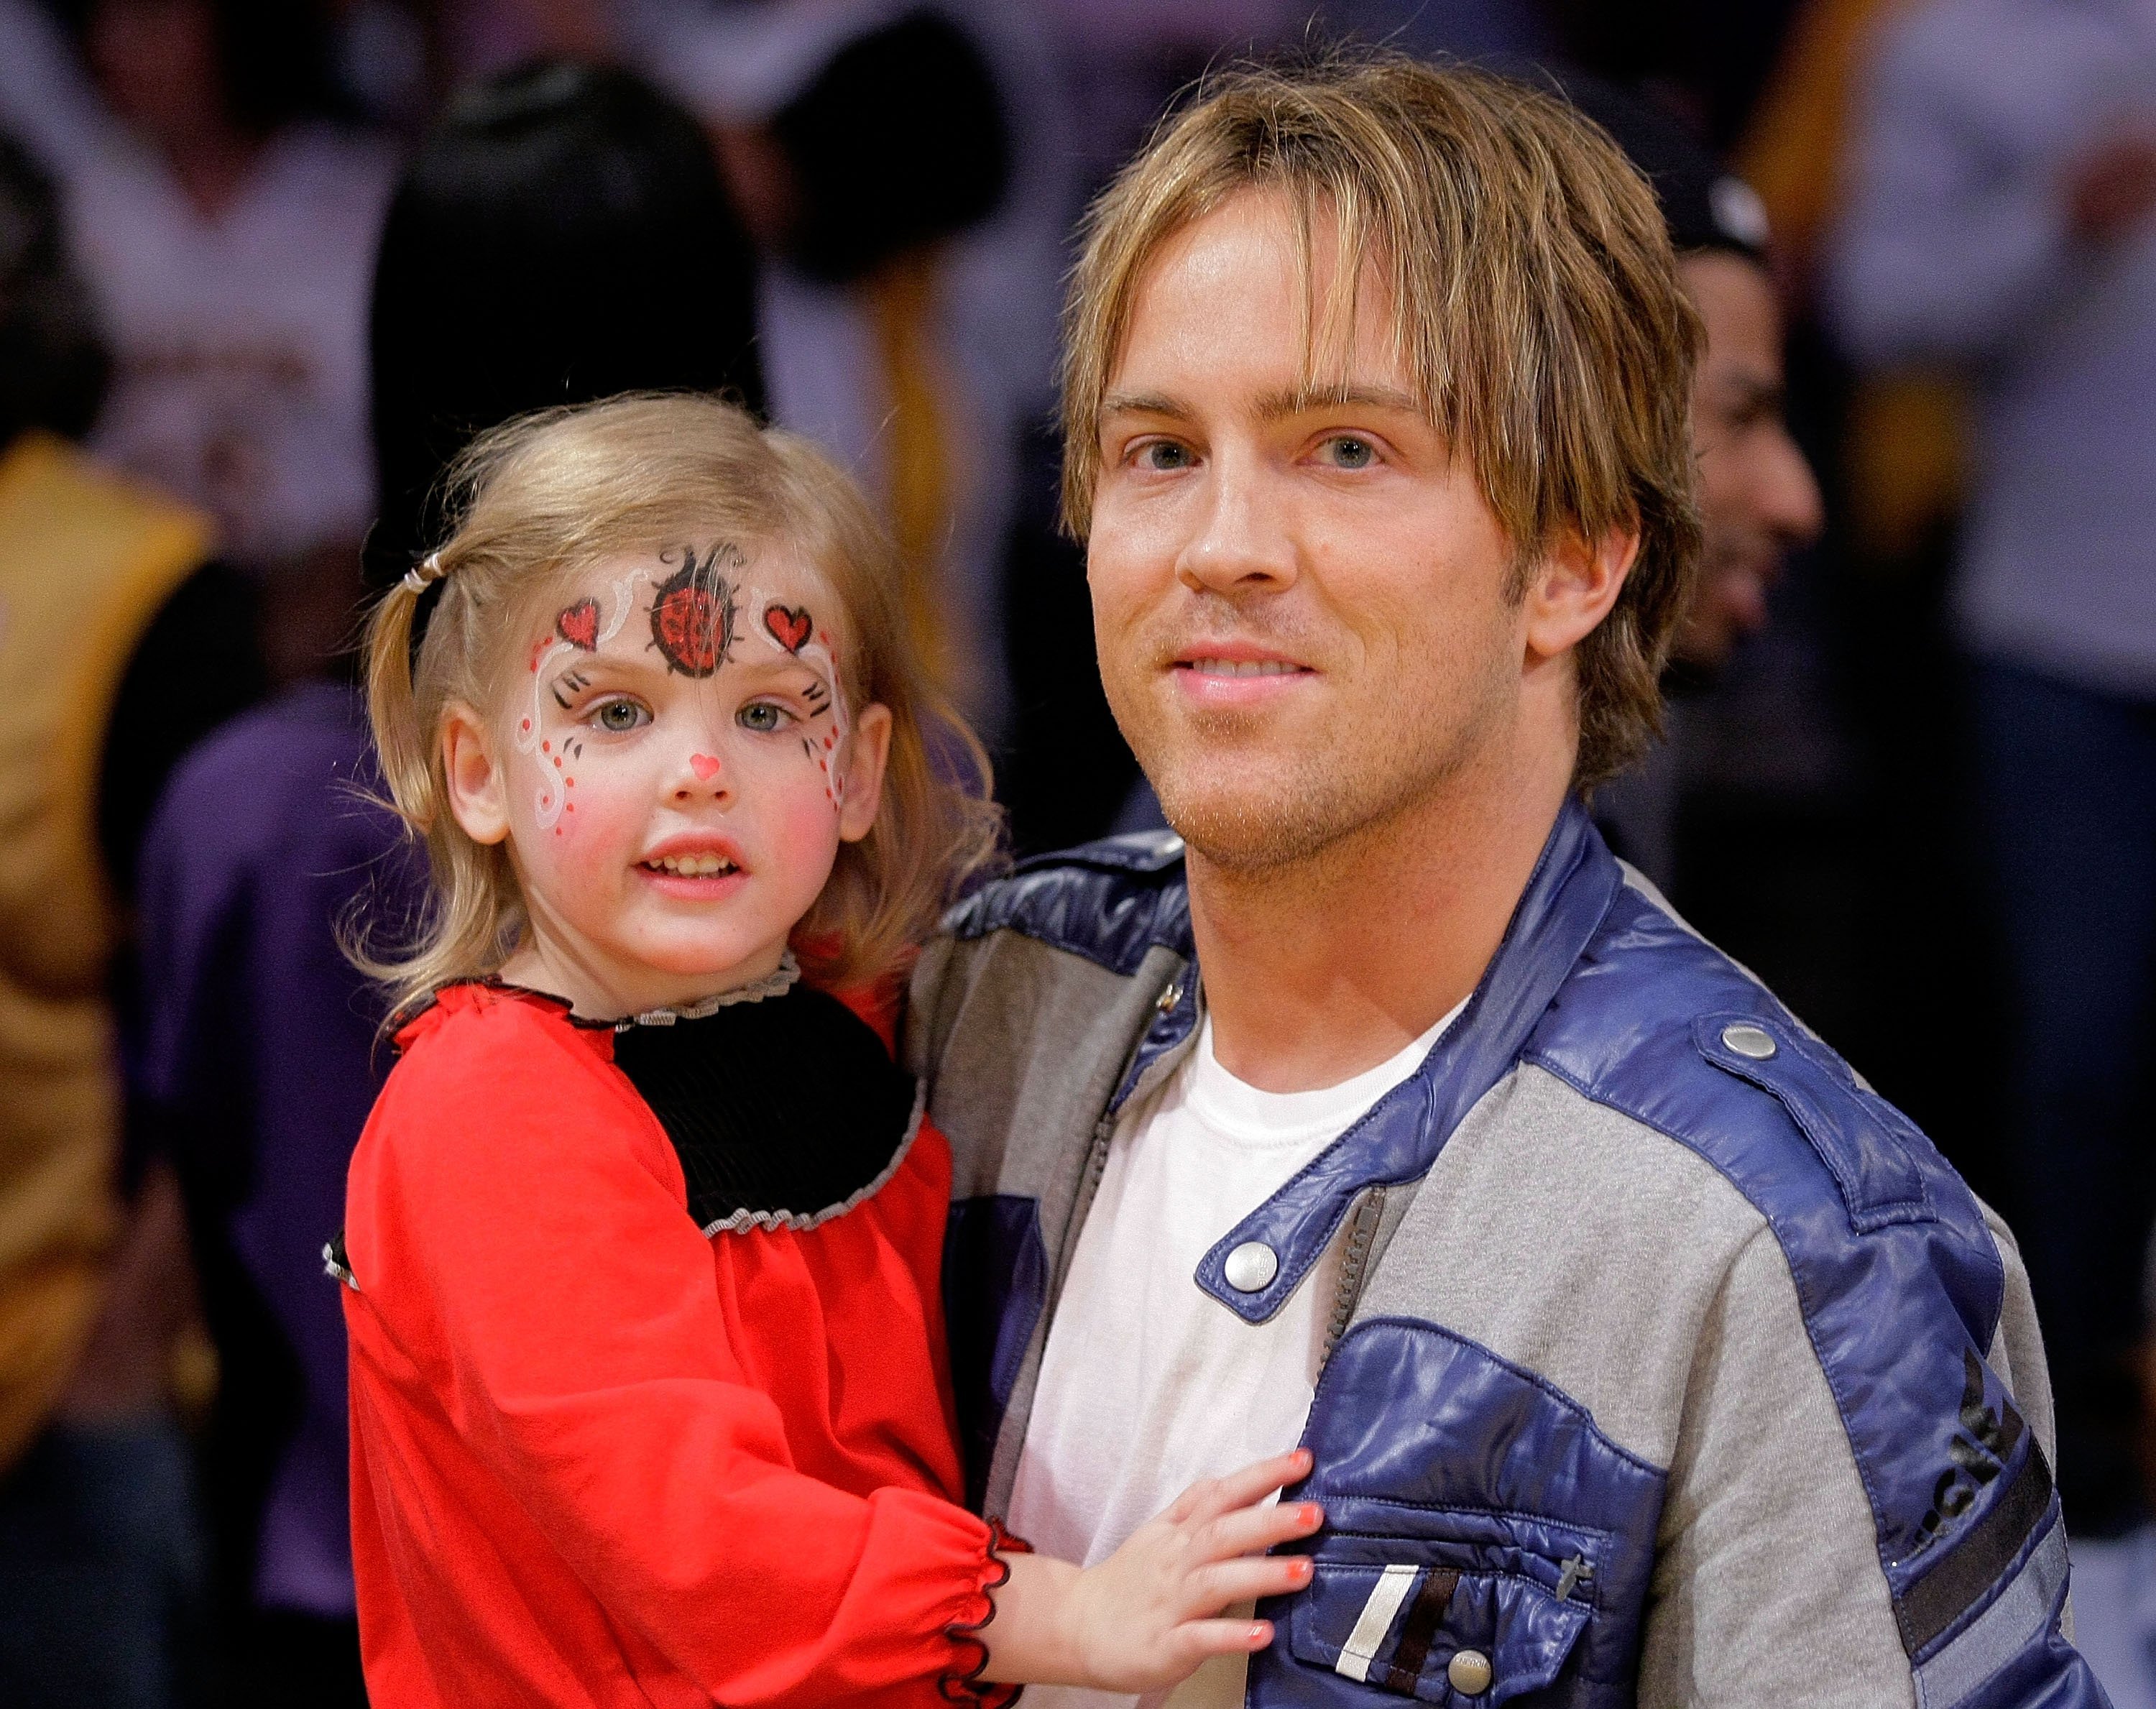 Larry and Dannielynn Birkhead at a game held at the Staples Center on November 8, 2009 in Los Angeles, California | Photo: Getty Images